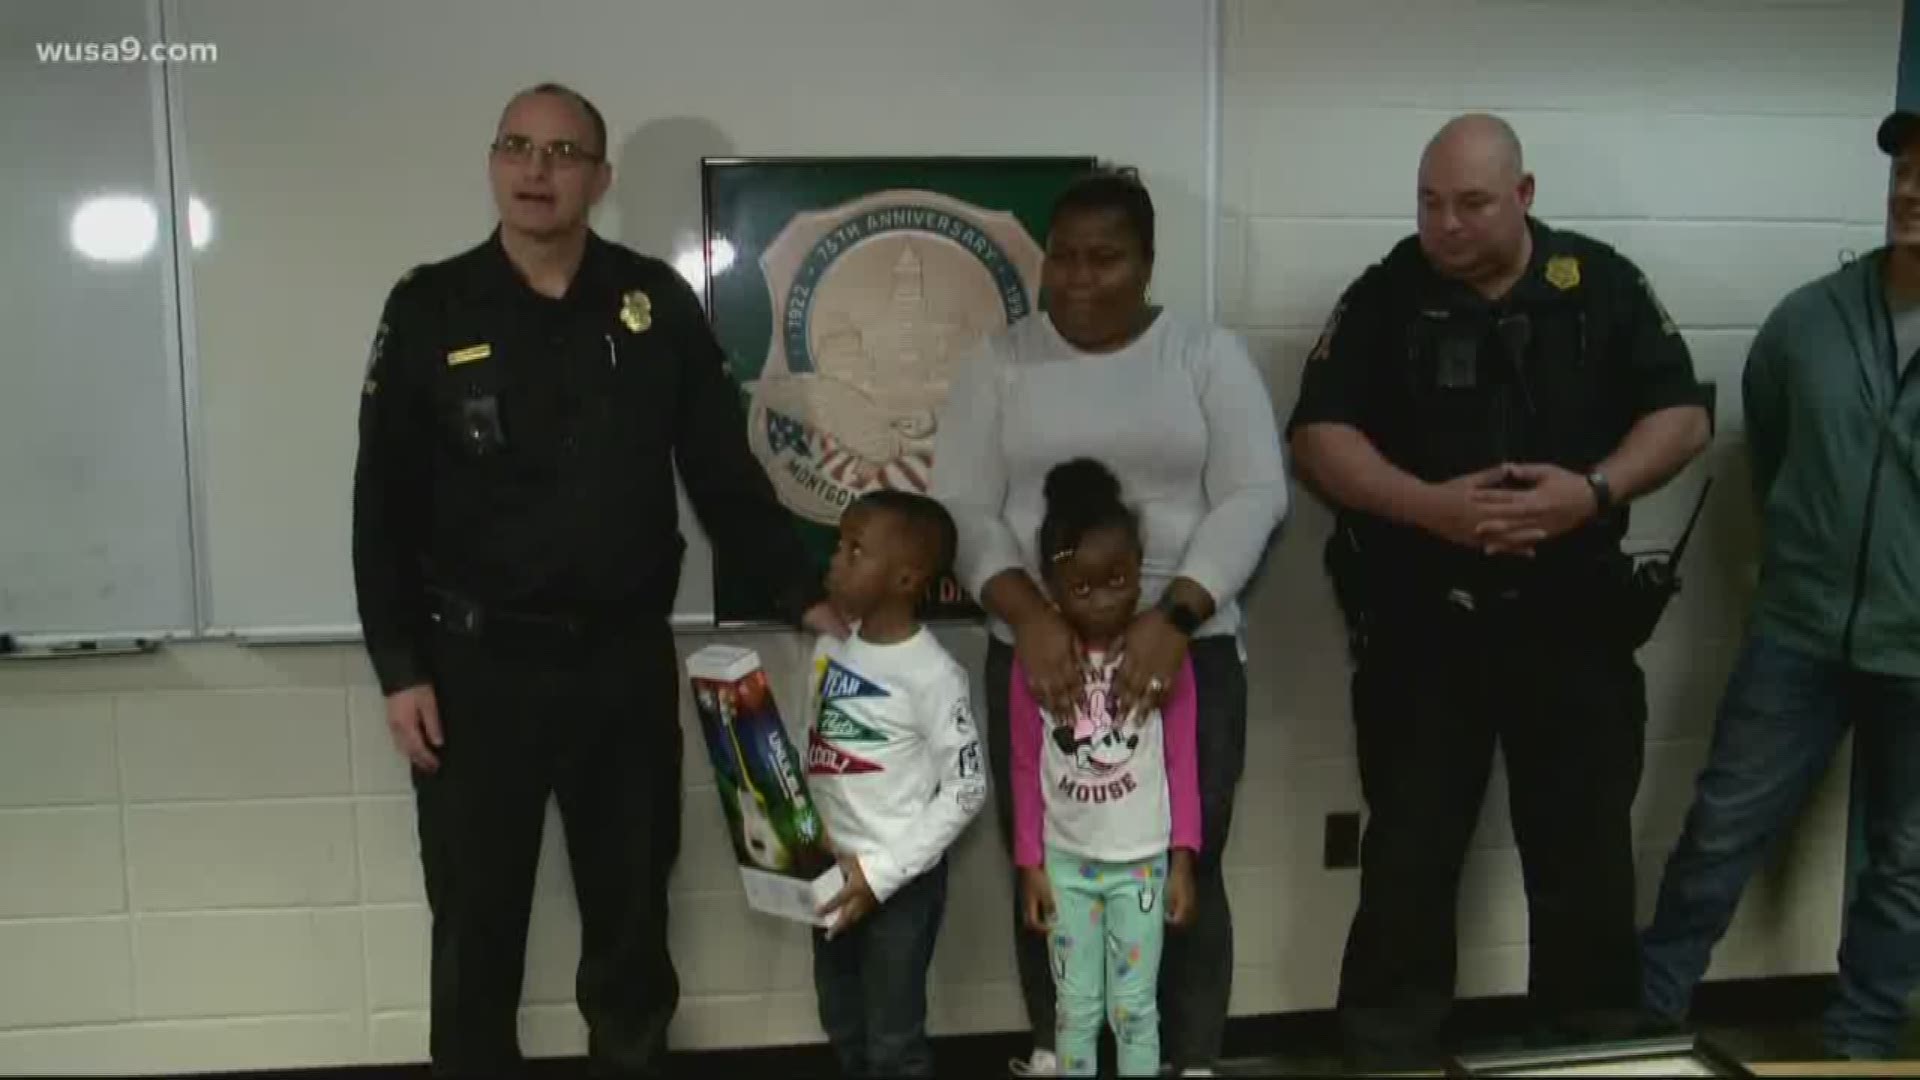 The four-year-old is being honored with the Commander's Certificate of Appreciation after helping officers find his mom who was in medical distress.